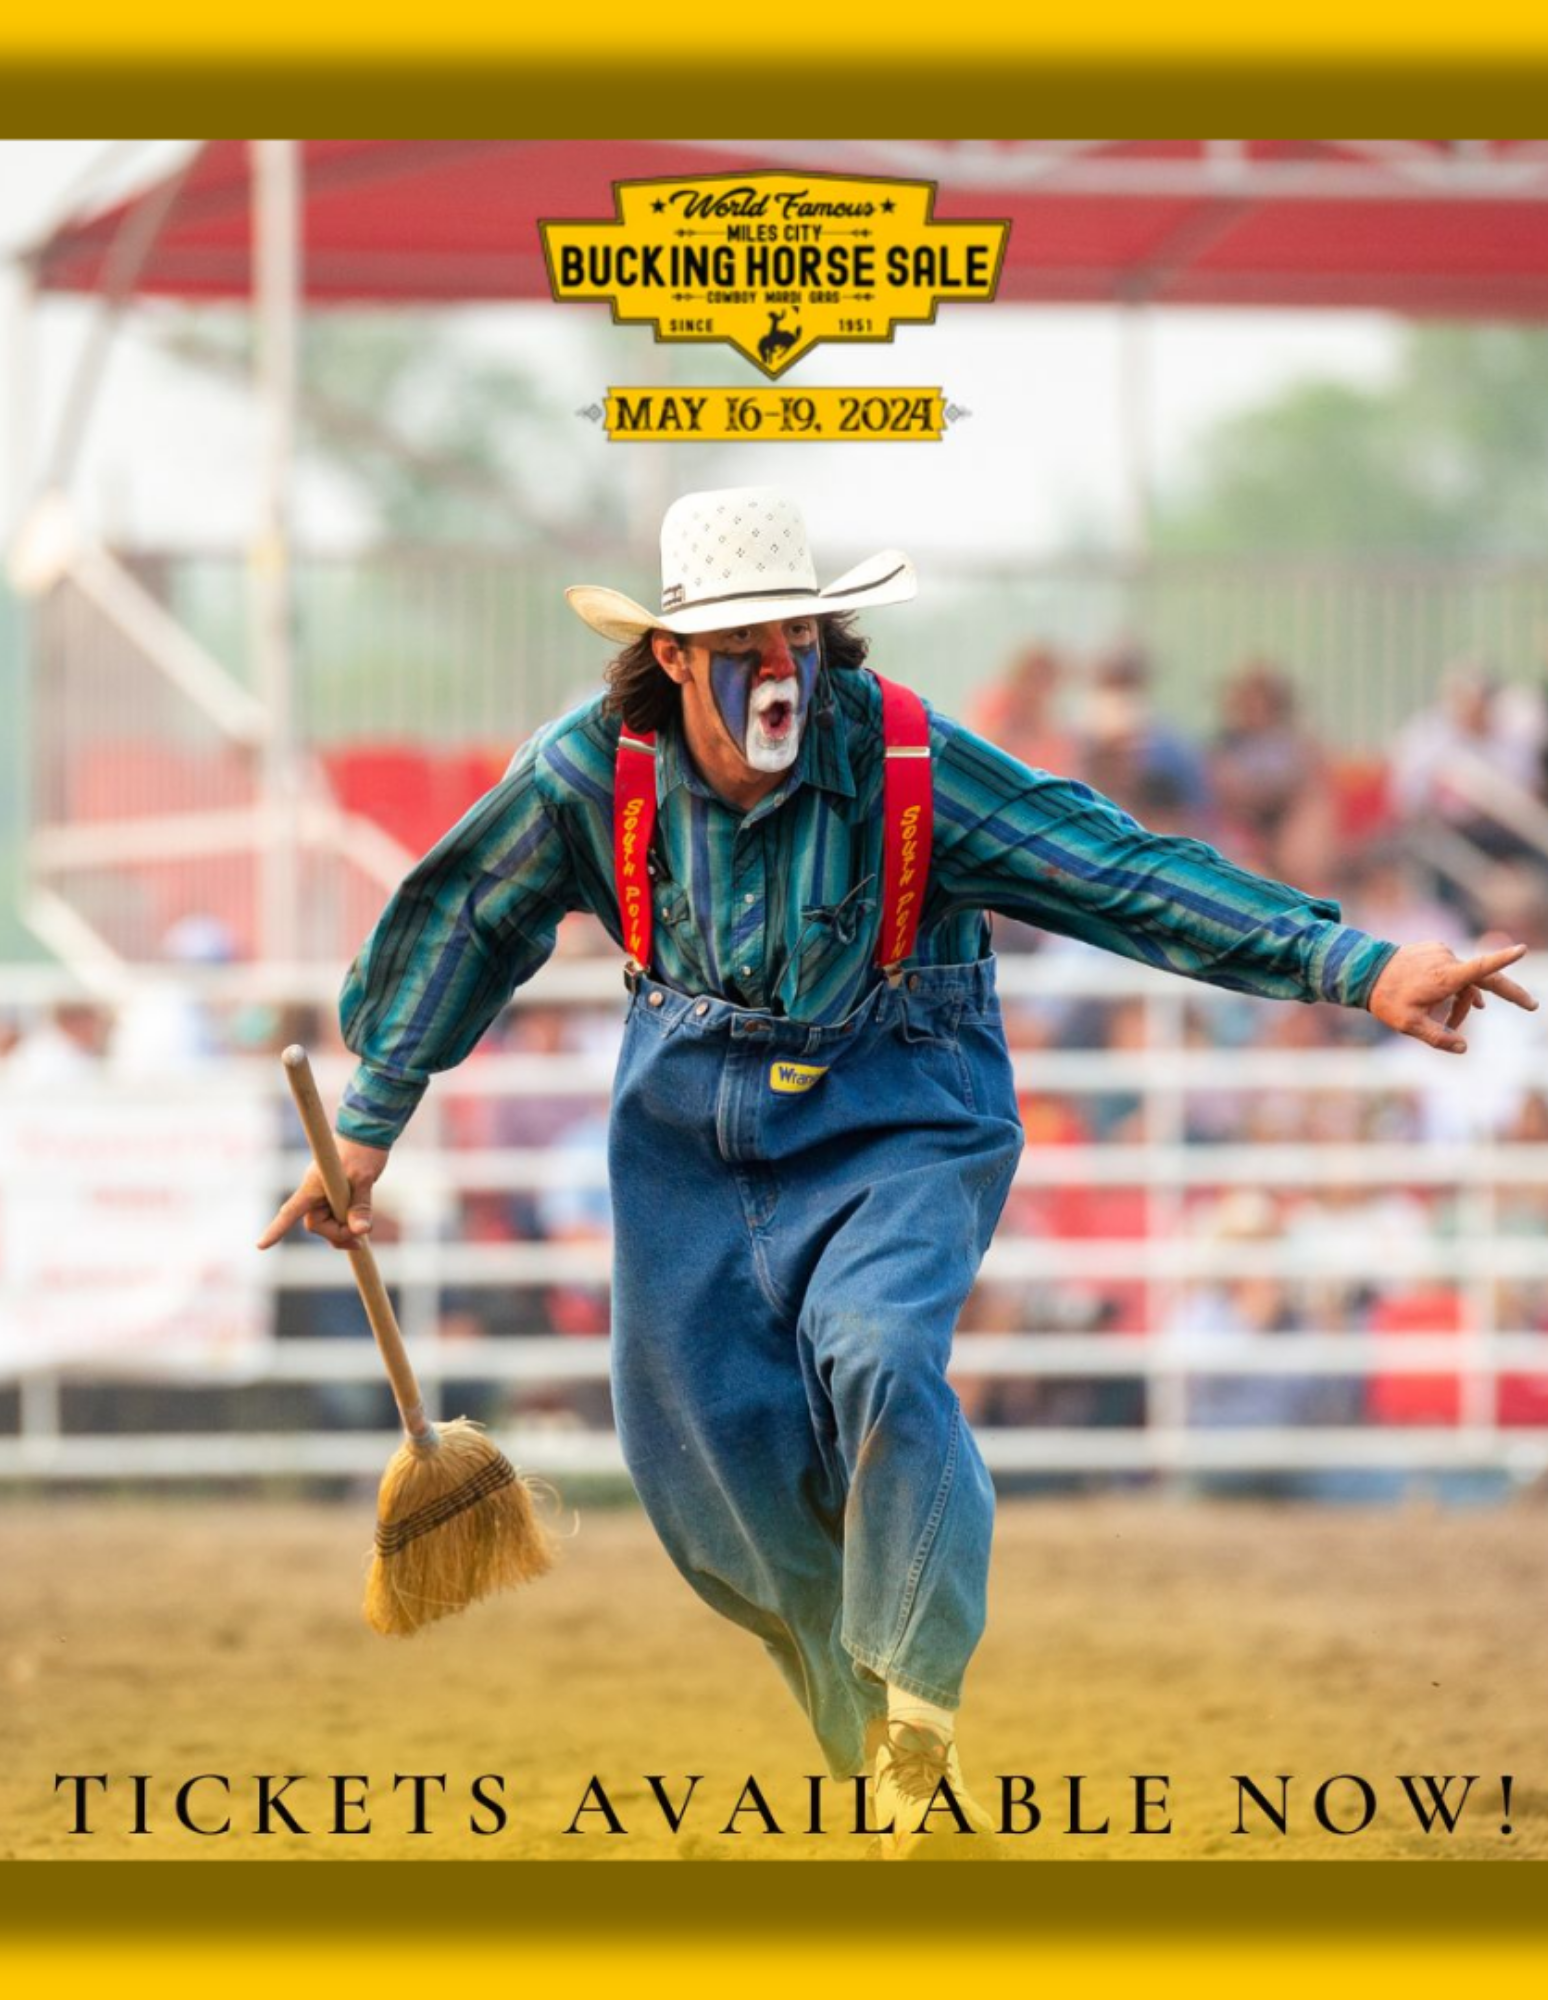 World Famous Miles City Bucking Horse Sale With Rodeo Clown